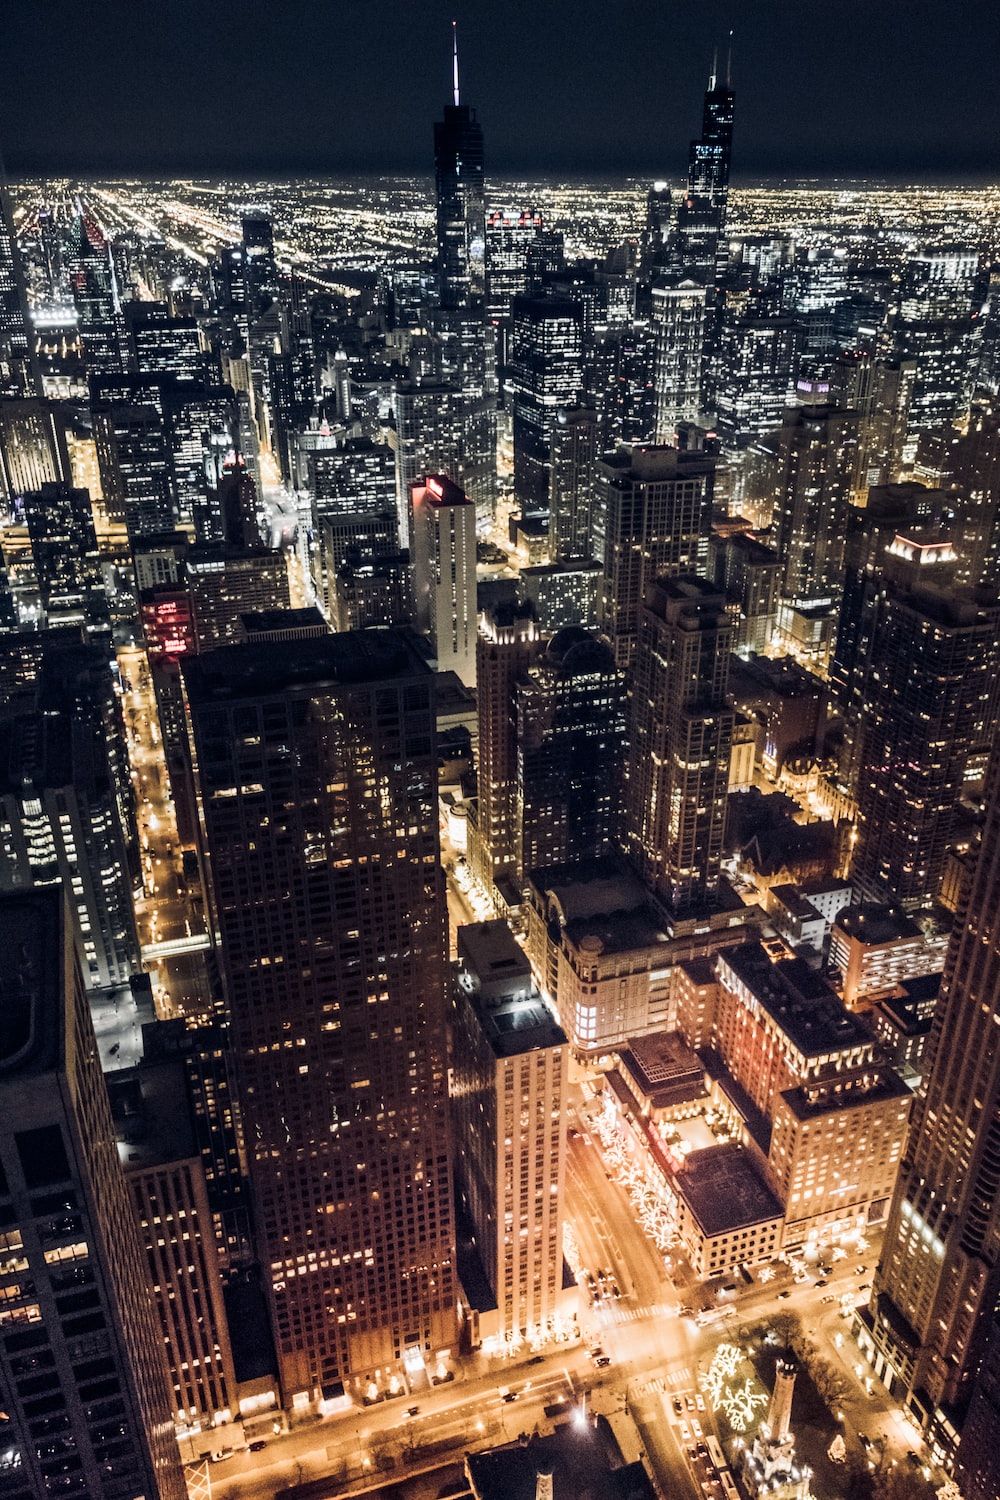 A city at night with many lights - Chicago